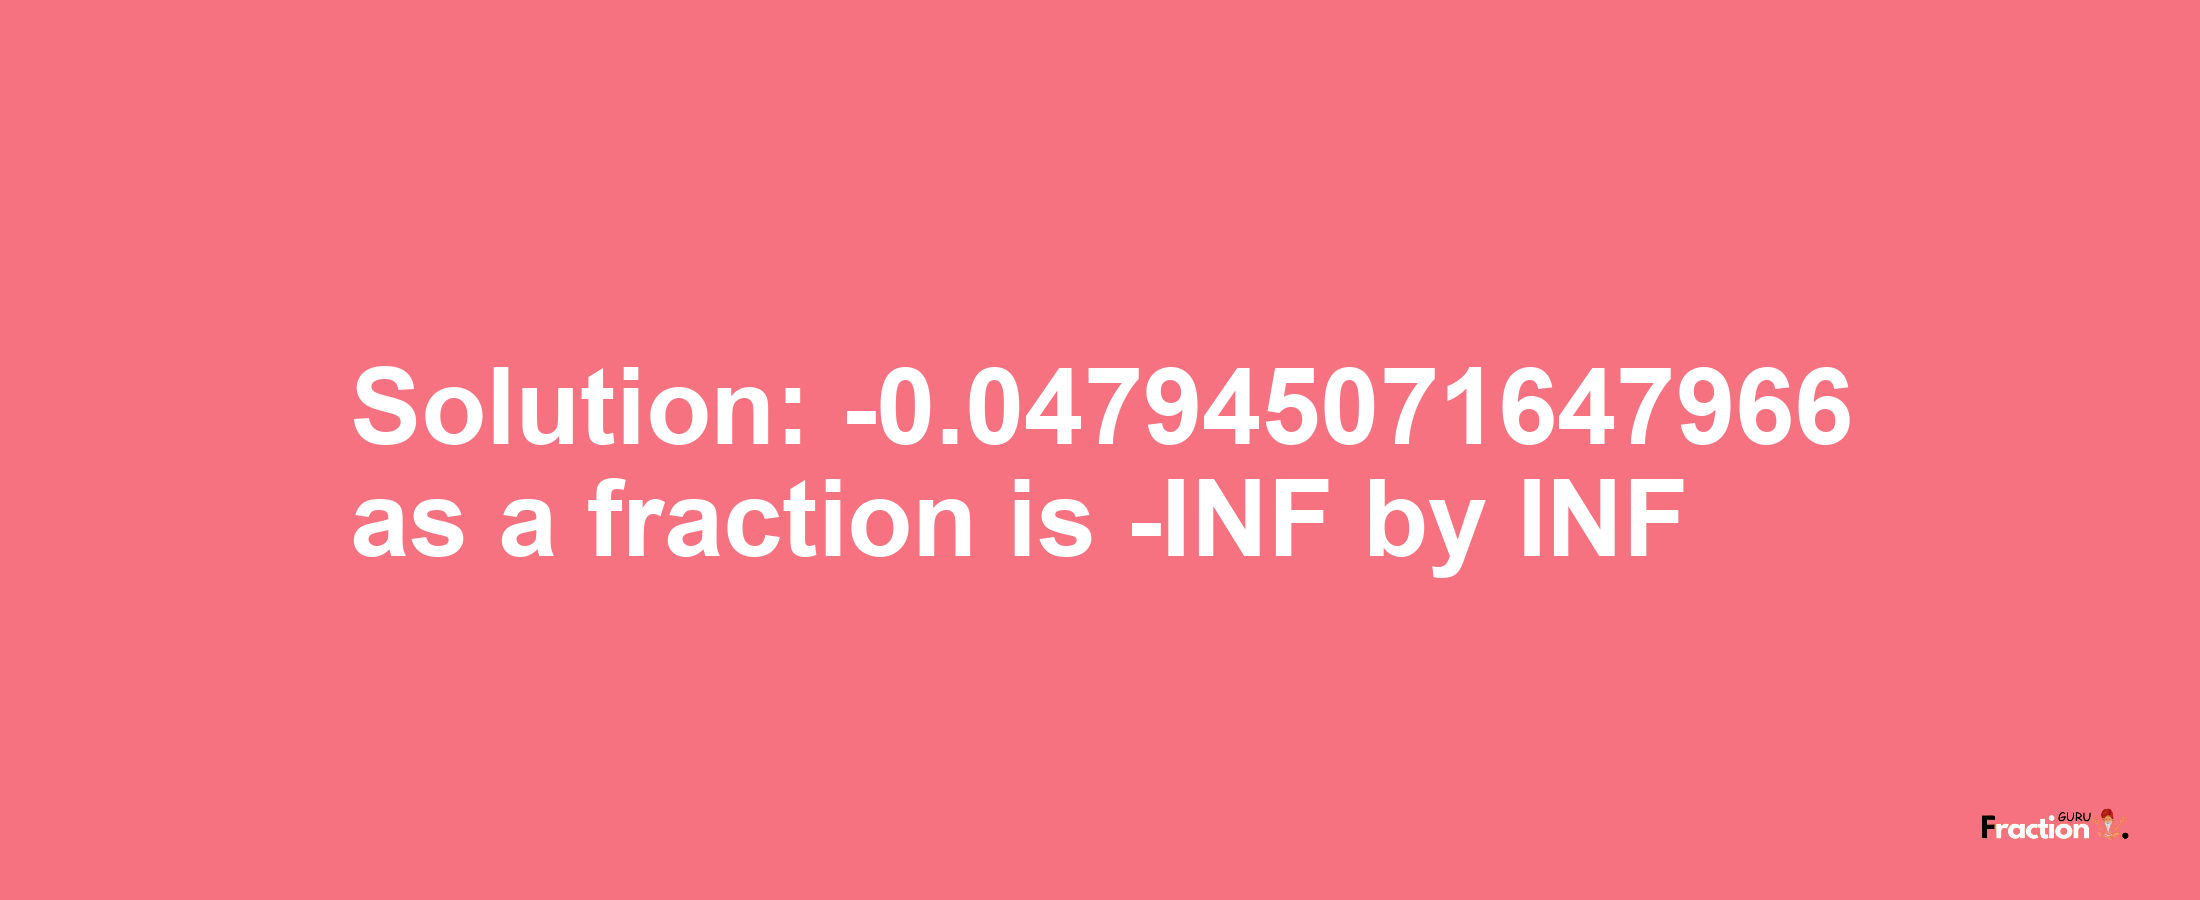 Solution:-0.047945071647966 as a fraction is -INF/INF